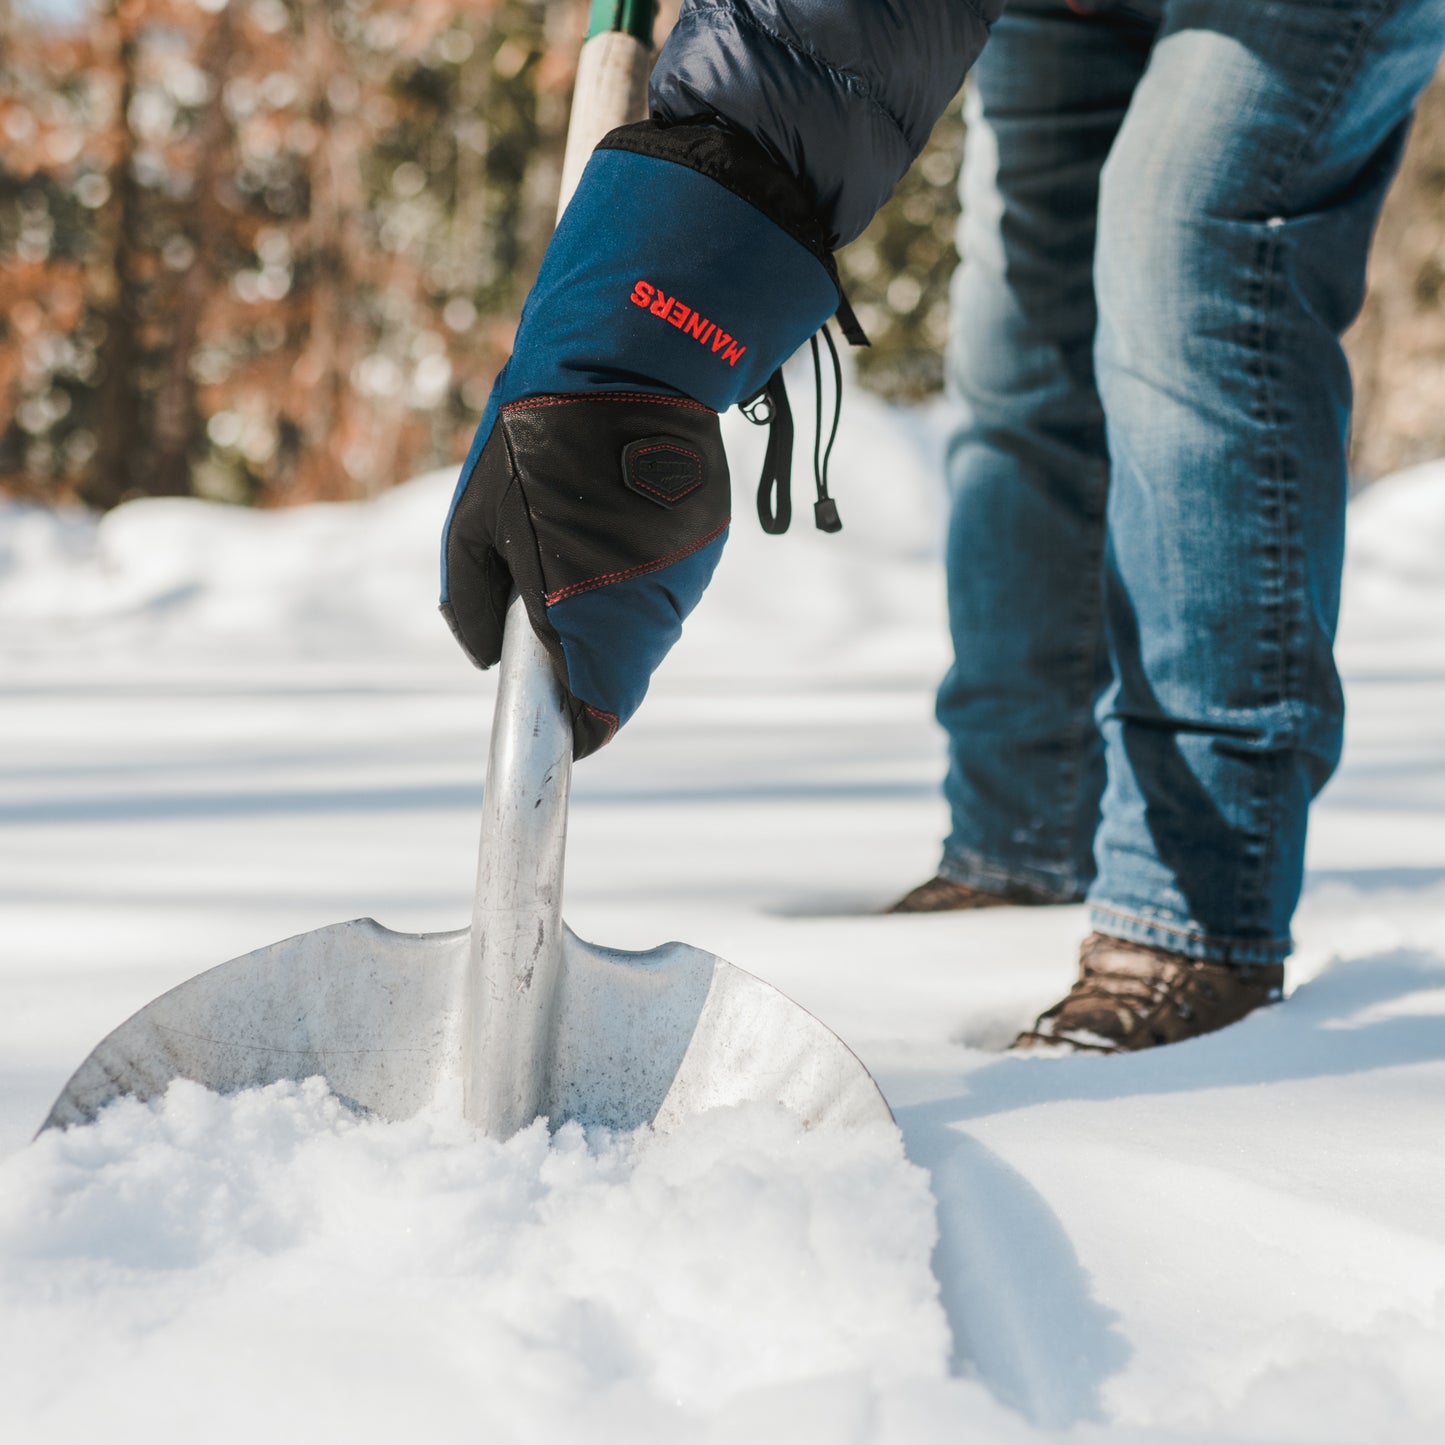 A person with a Mainers Mitts-clad hand holding a shovel in the snow.